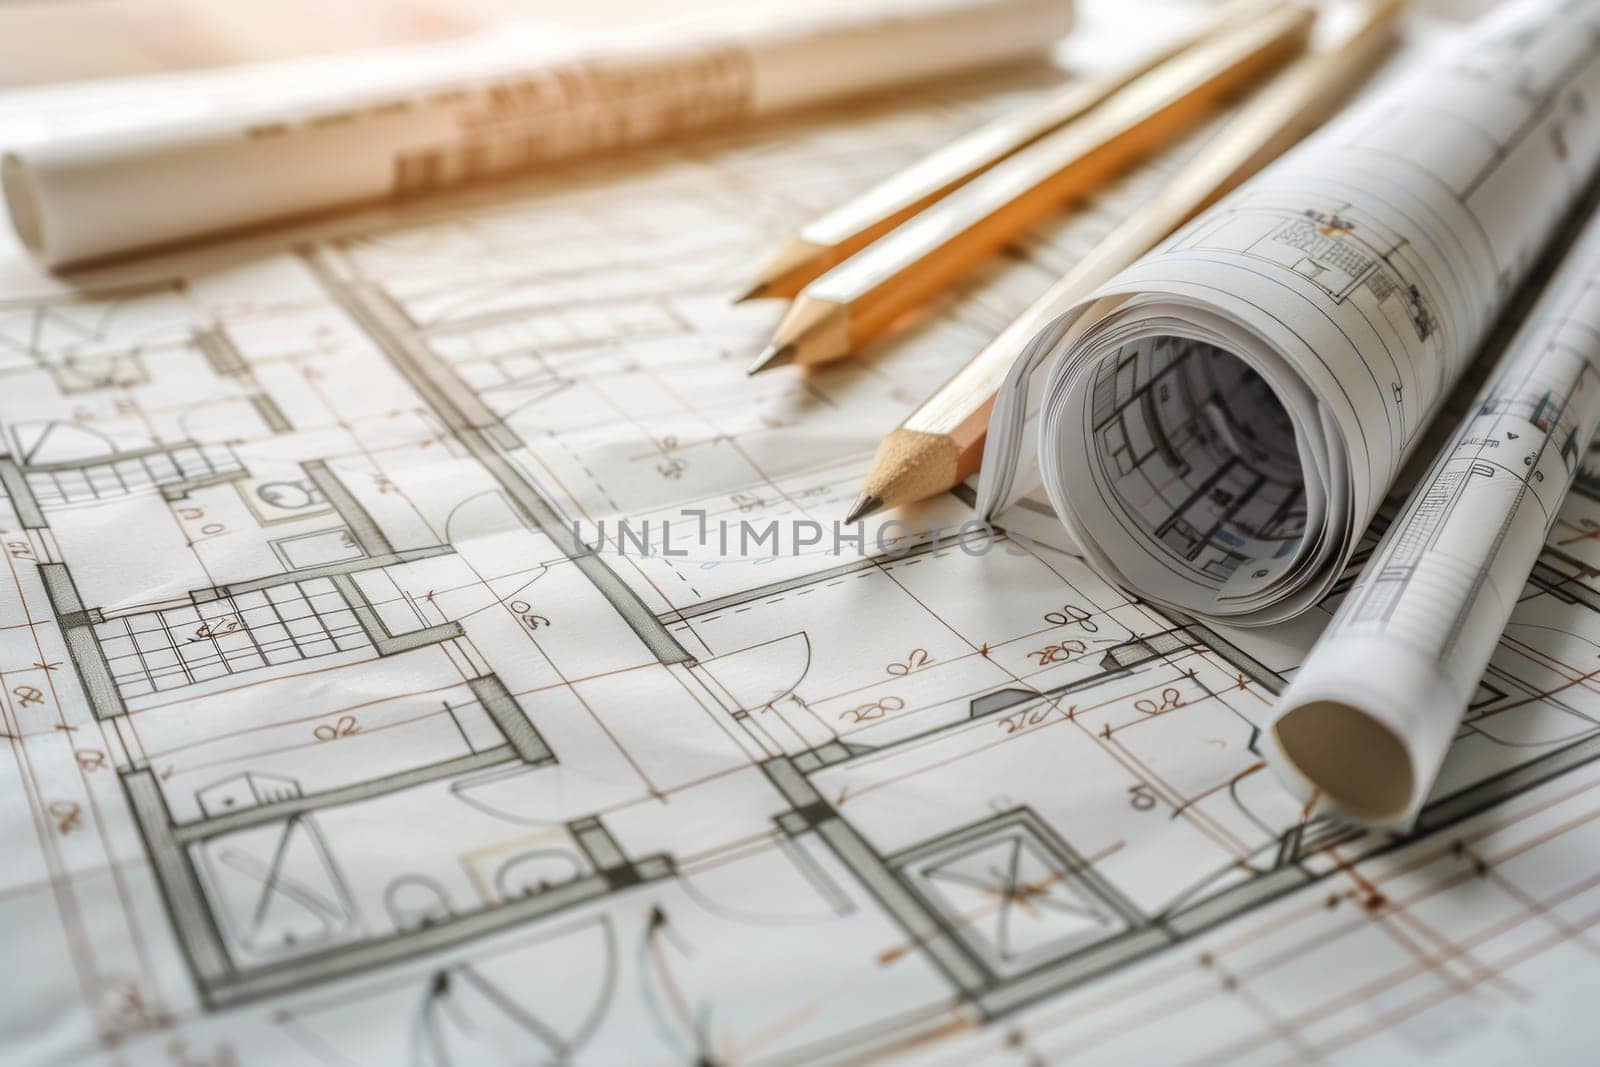 Architectural drawings and pencils are meticulously placed on top of a blueprint, revealing innovative design concepts and meticulous planning.